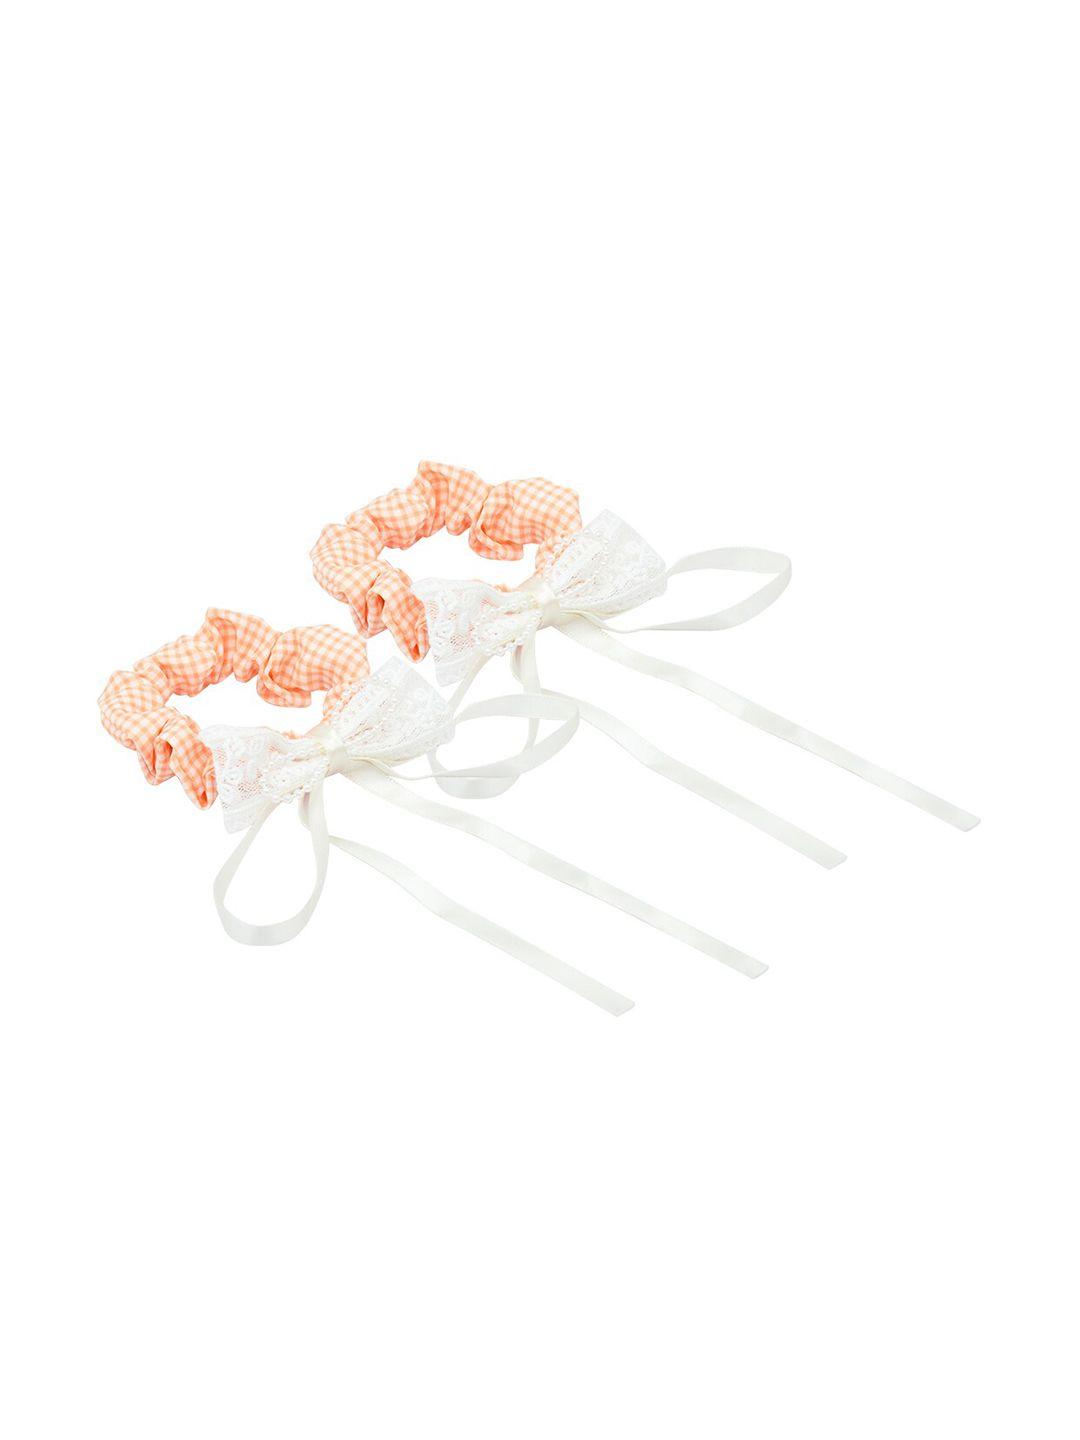 funkrafts girls peach-coloured & white set of 2 lace hair accessory set